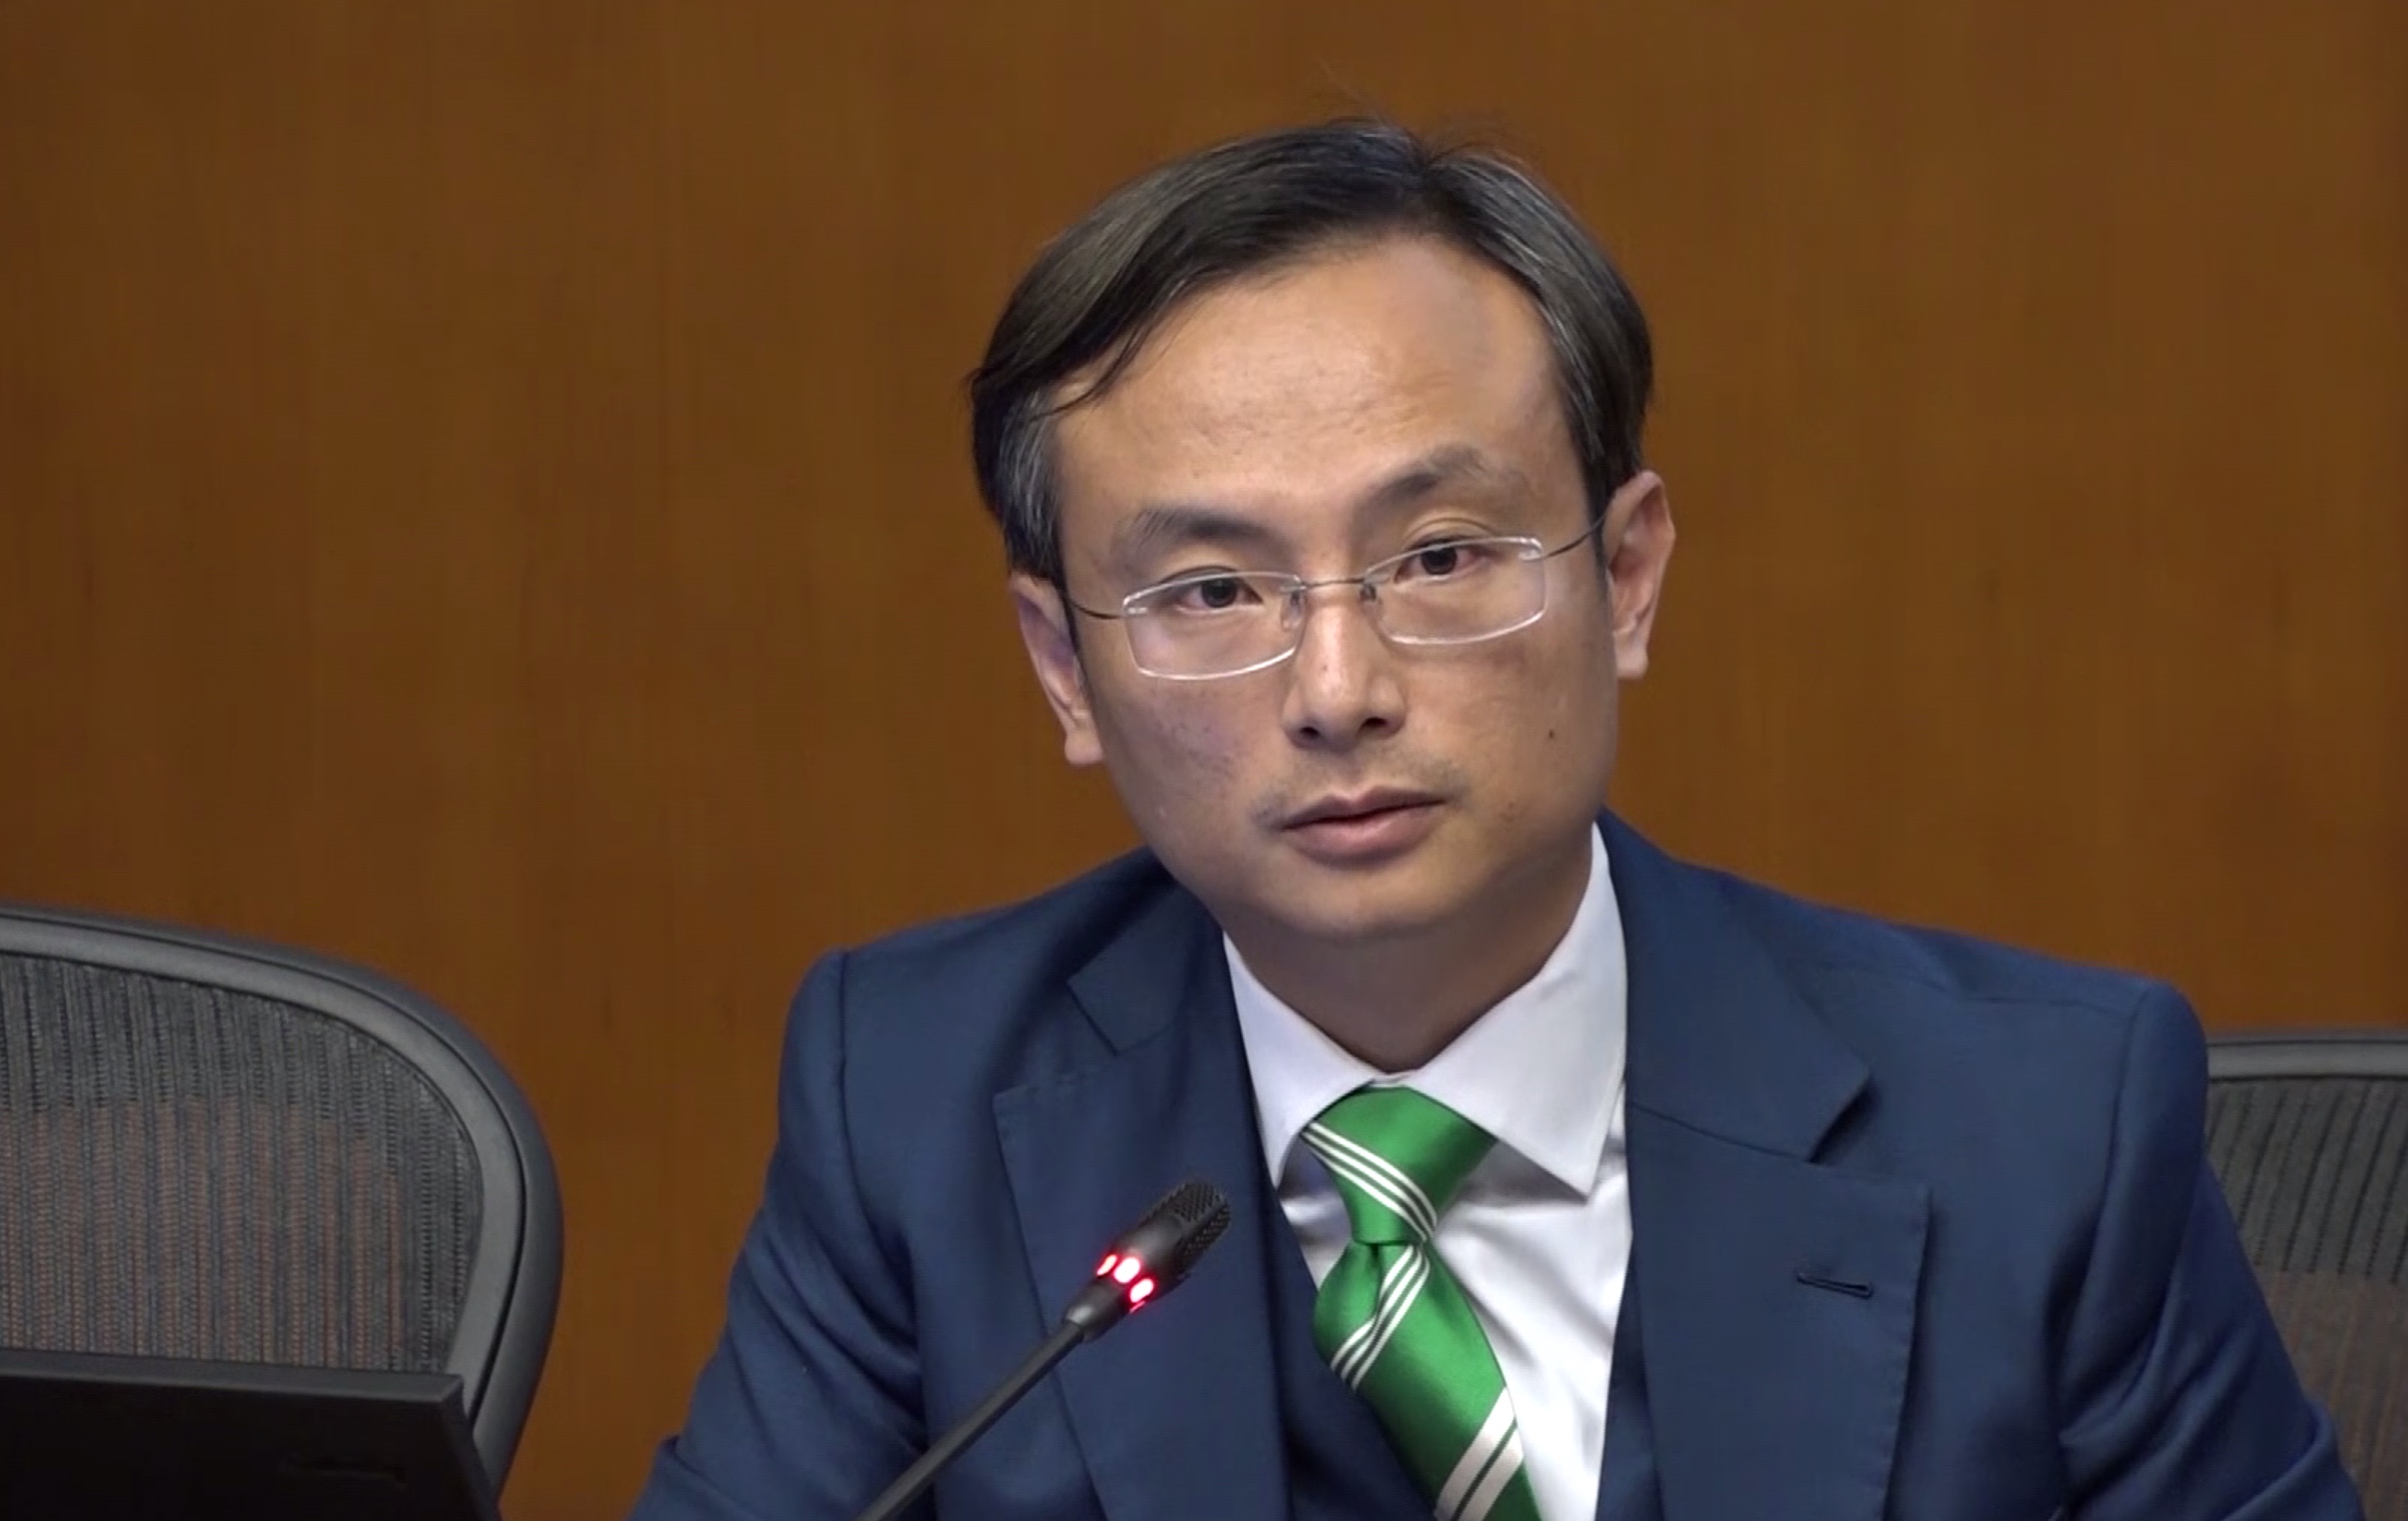 Lawmaker Pierre Chan tells members of the press about a secret backdoor that allowed police to access patients’ hospital records. Screengrab via RTHK.